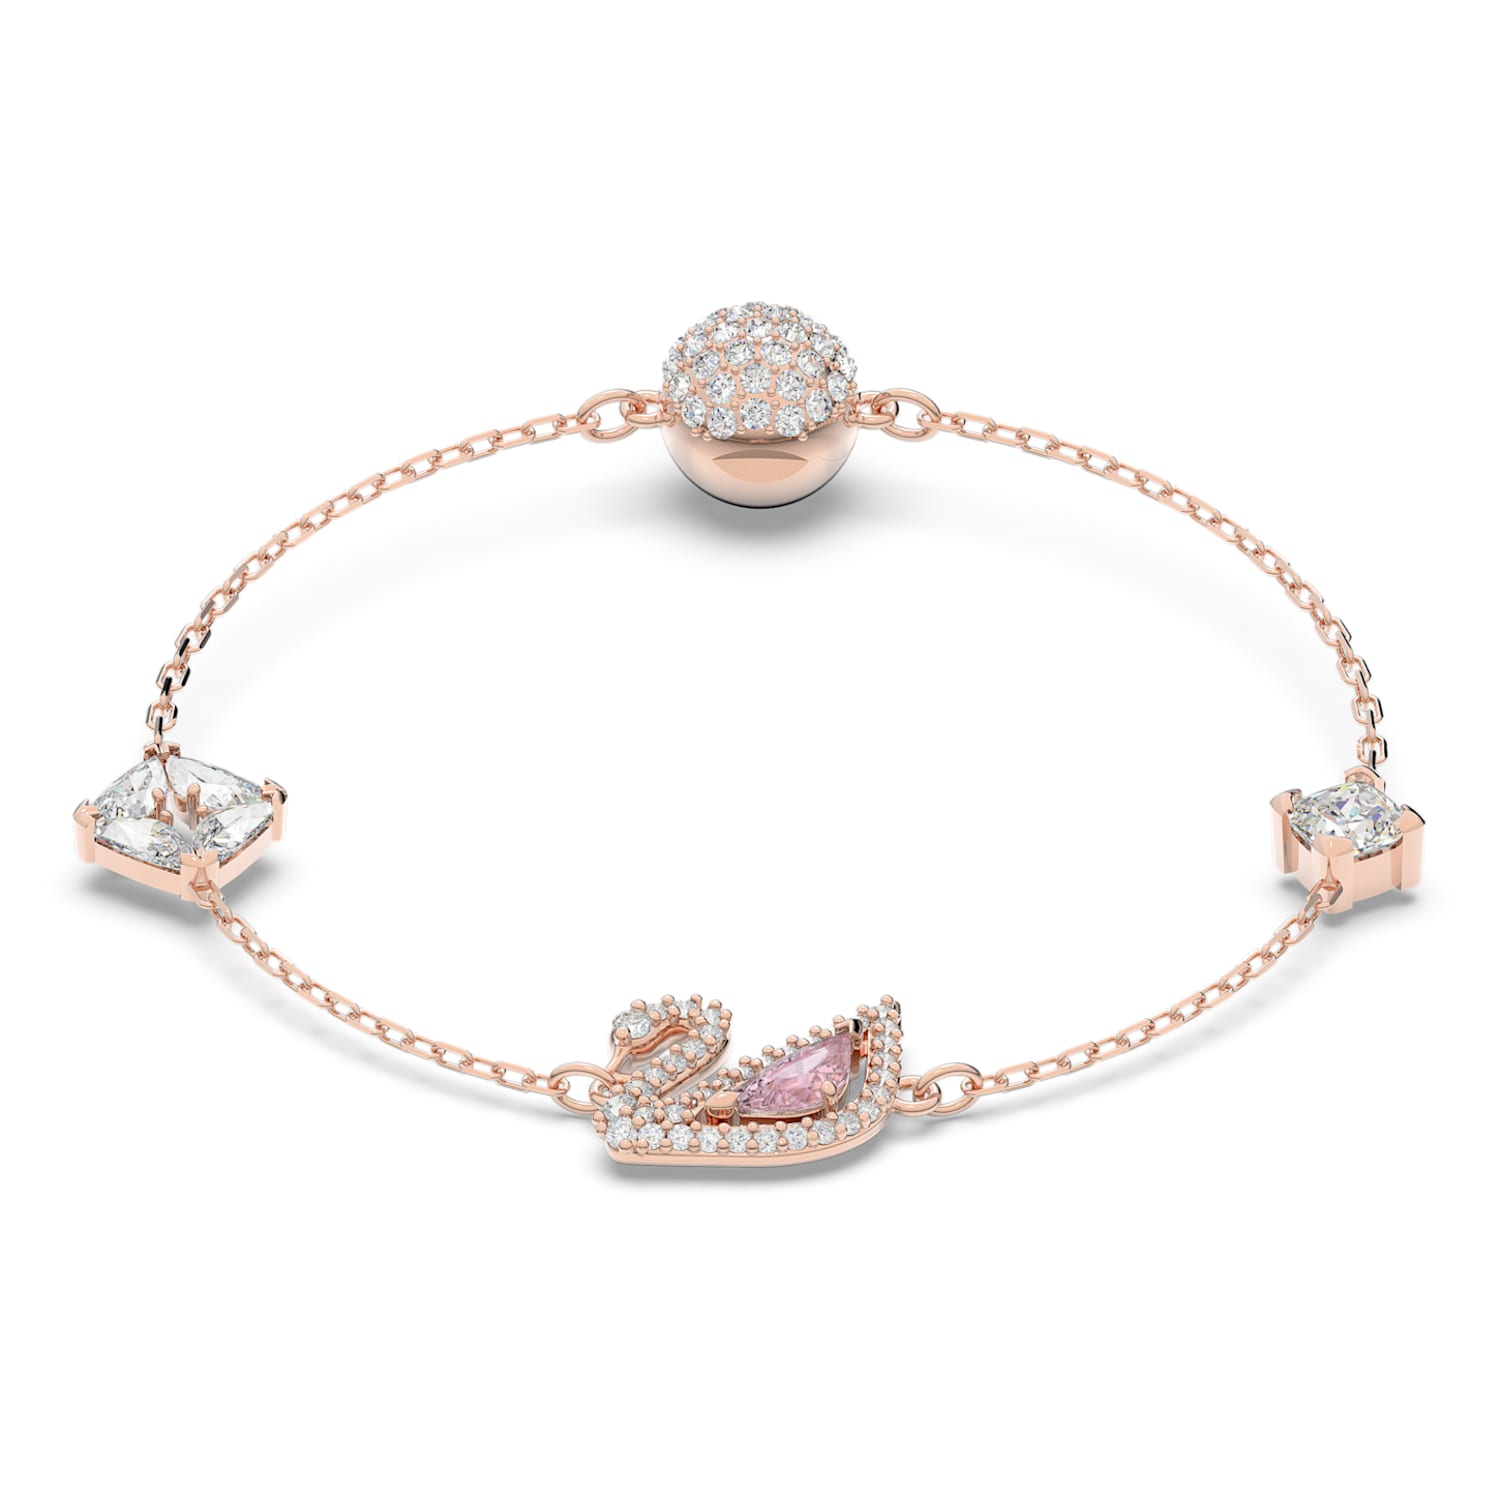 Dazzling Swan Bracelet, Multi-colored, Rose-gold tone plated